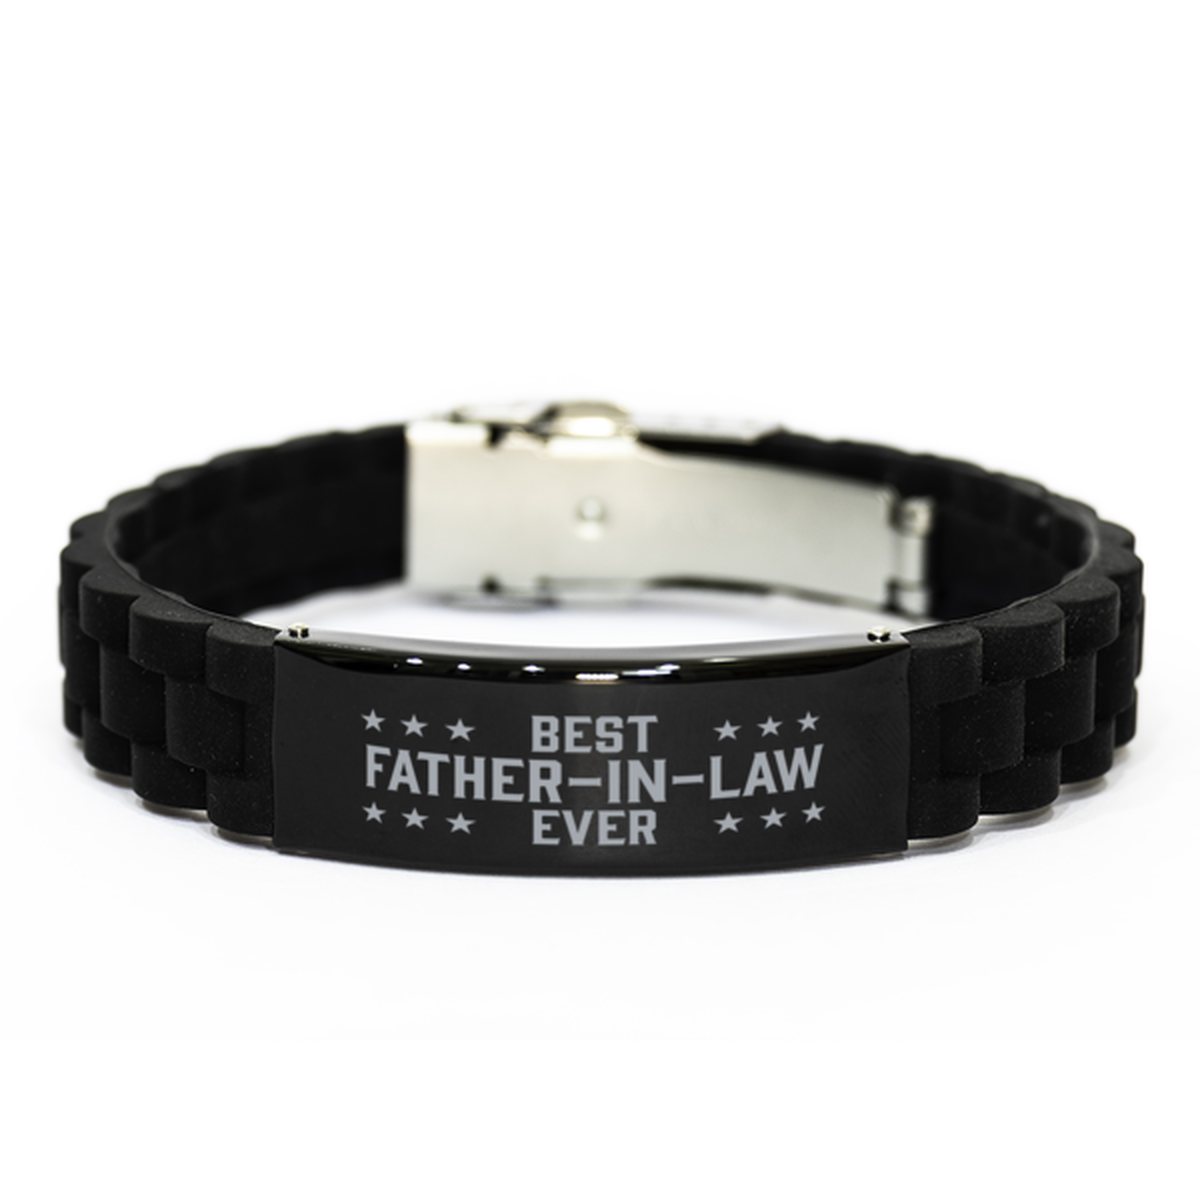 Best Father-in-law Ever Father-in-law Gifts, Funny Black Engraved Bracelet For Father-in-law, Family Gifts For Men